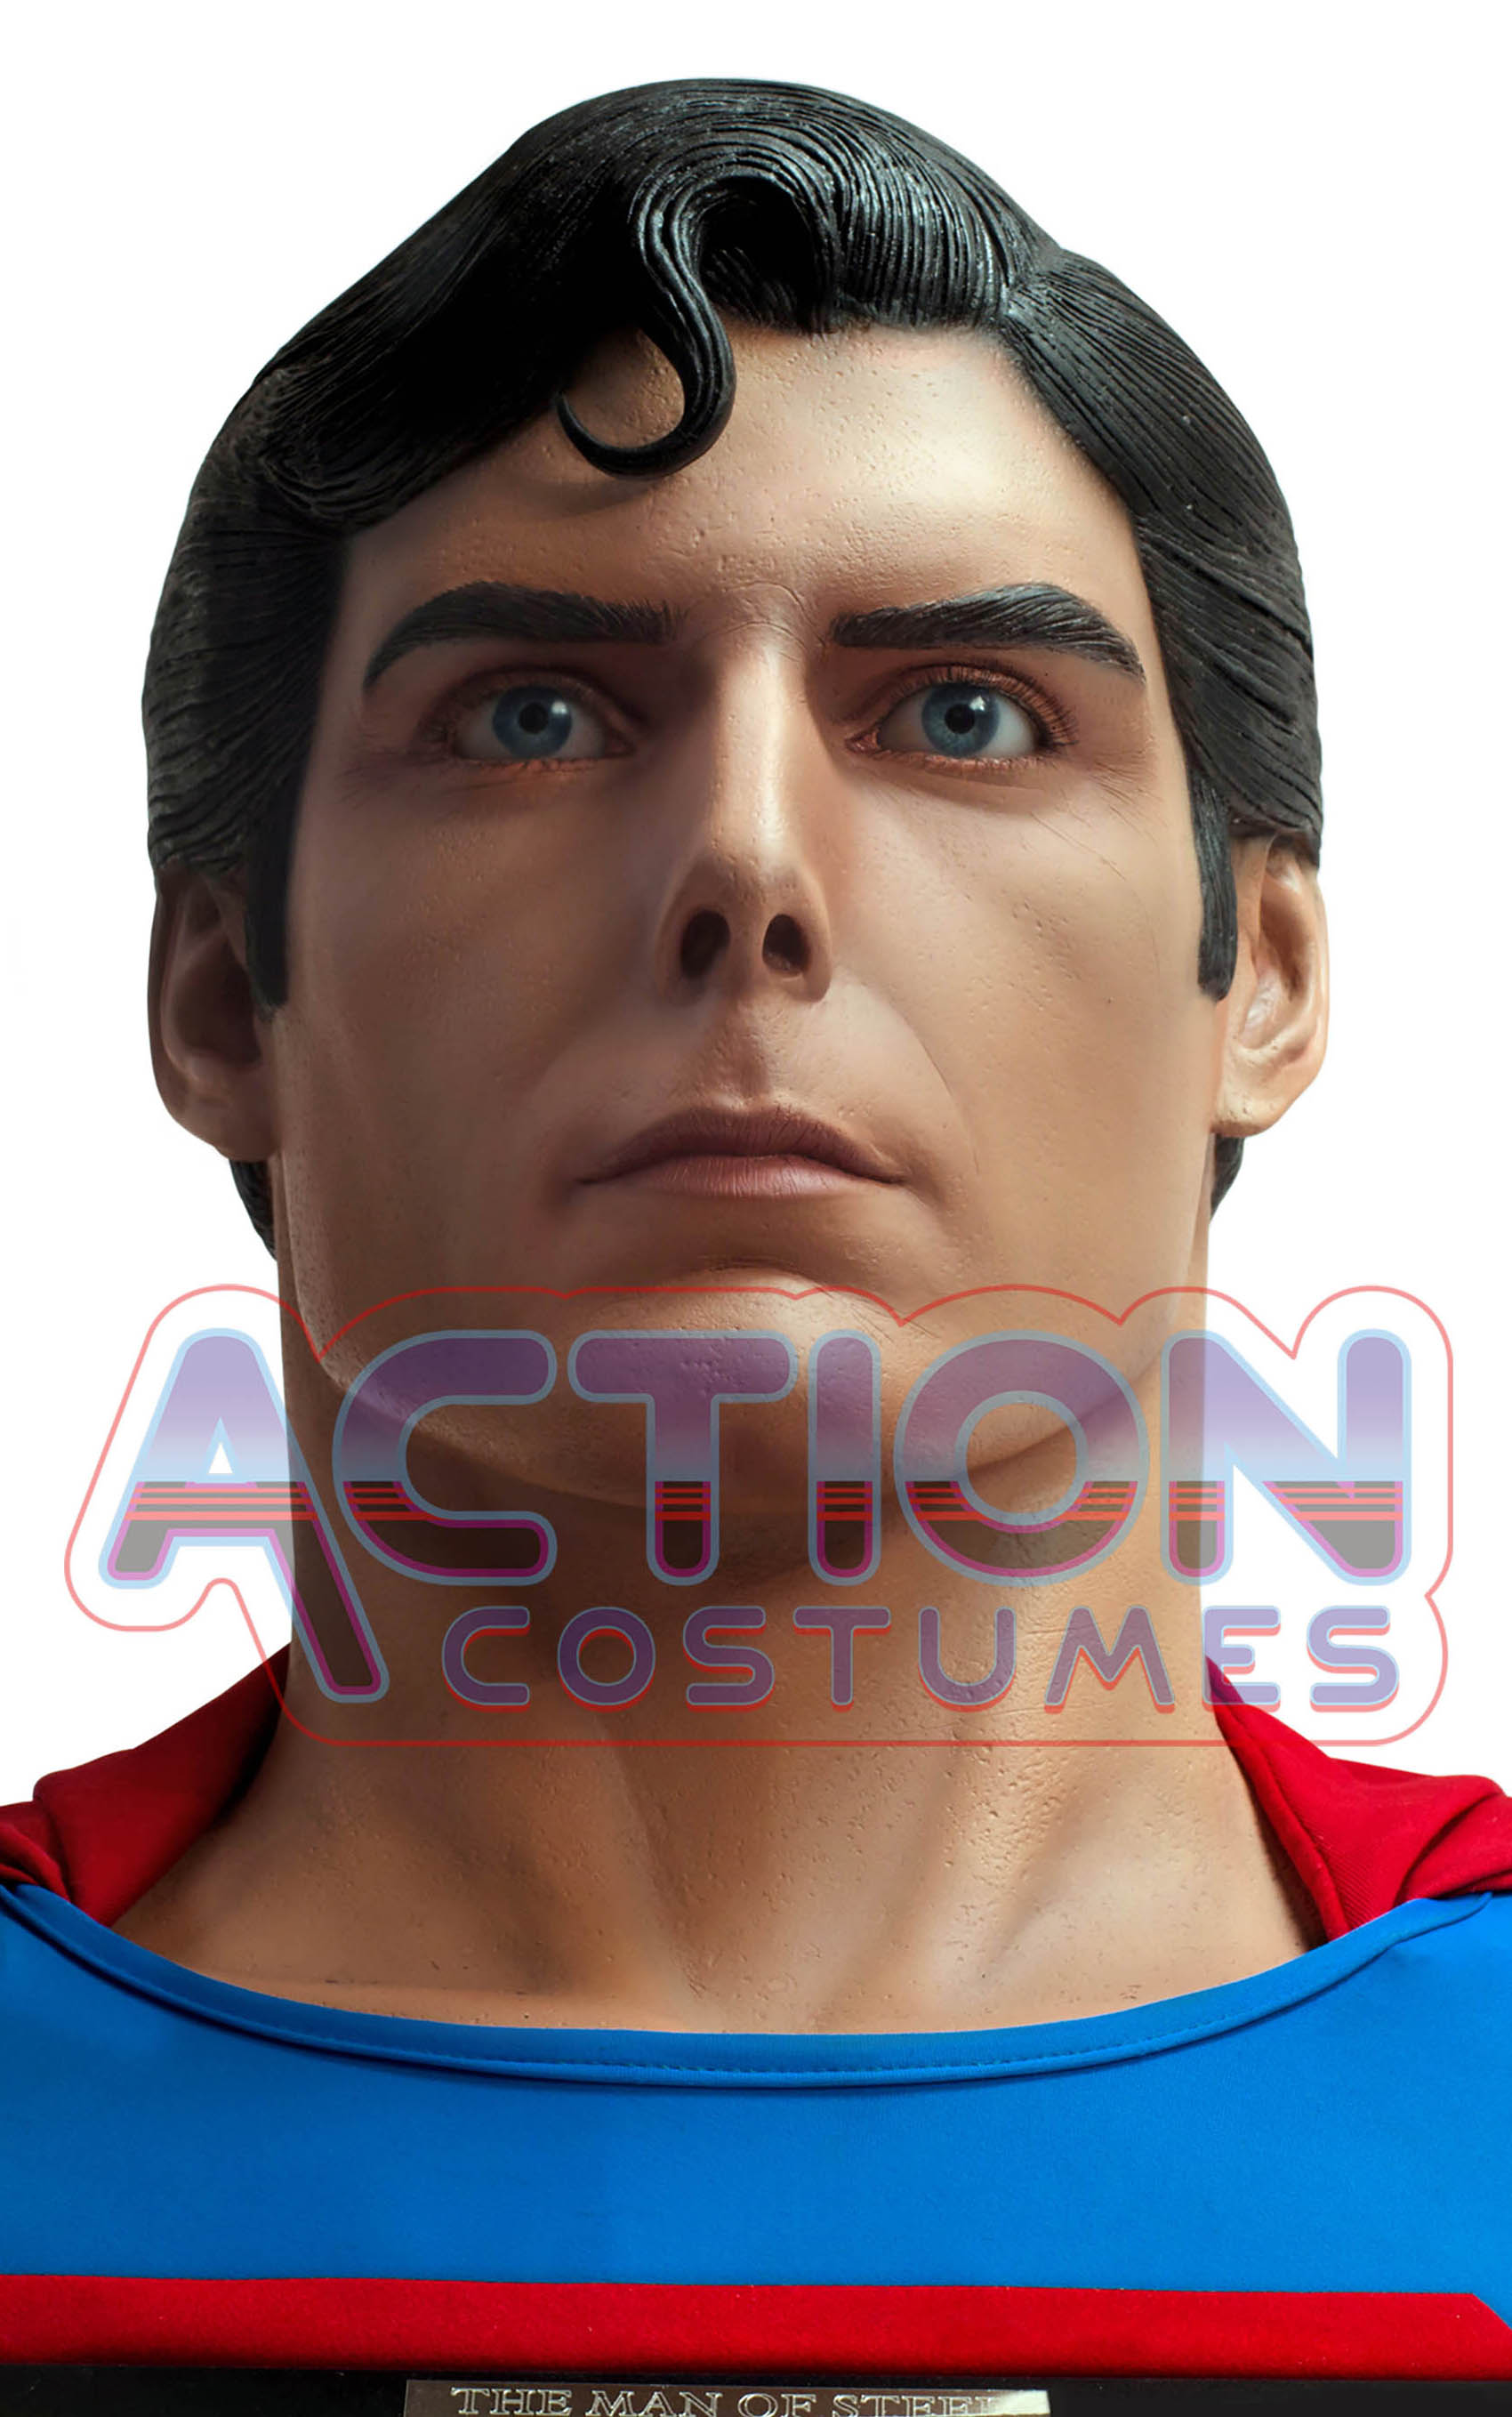 christopher-reeve-bust-80s-style